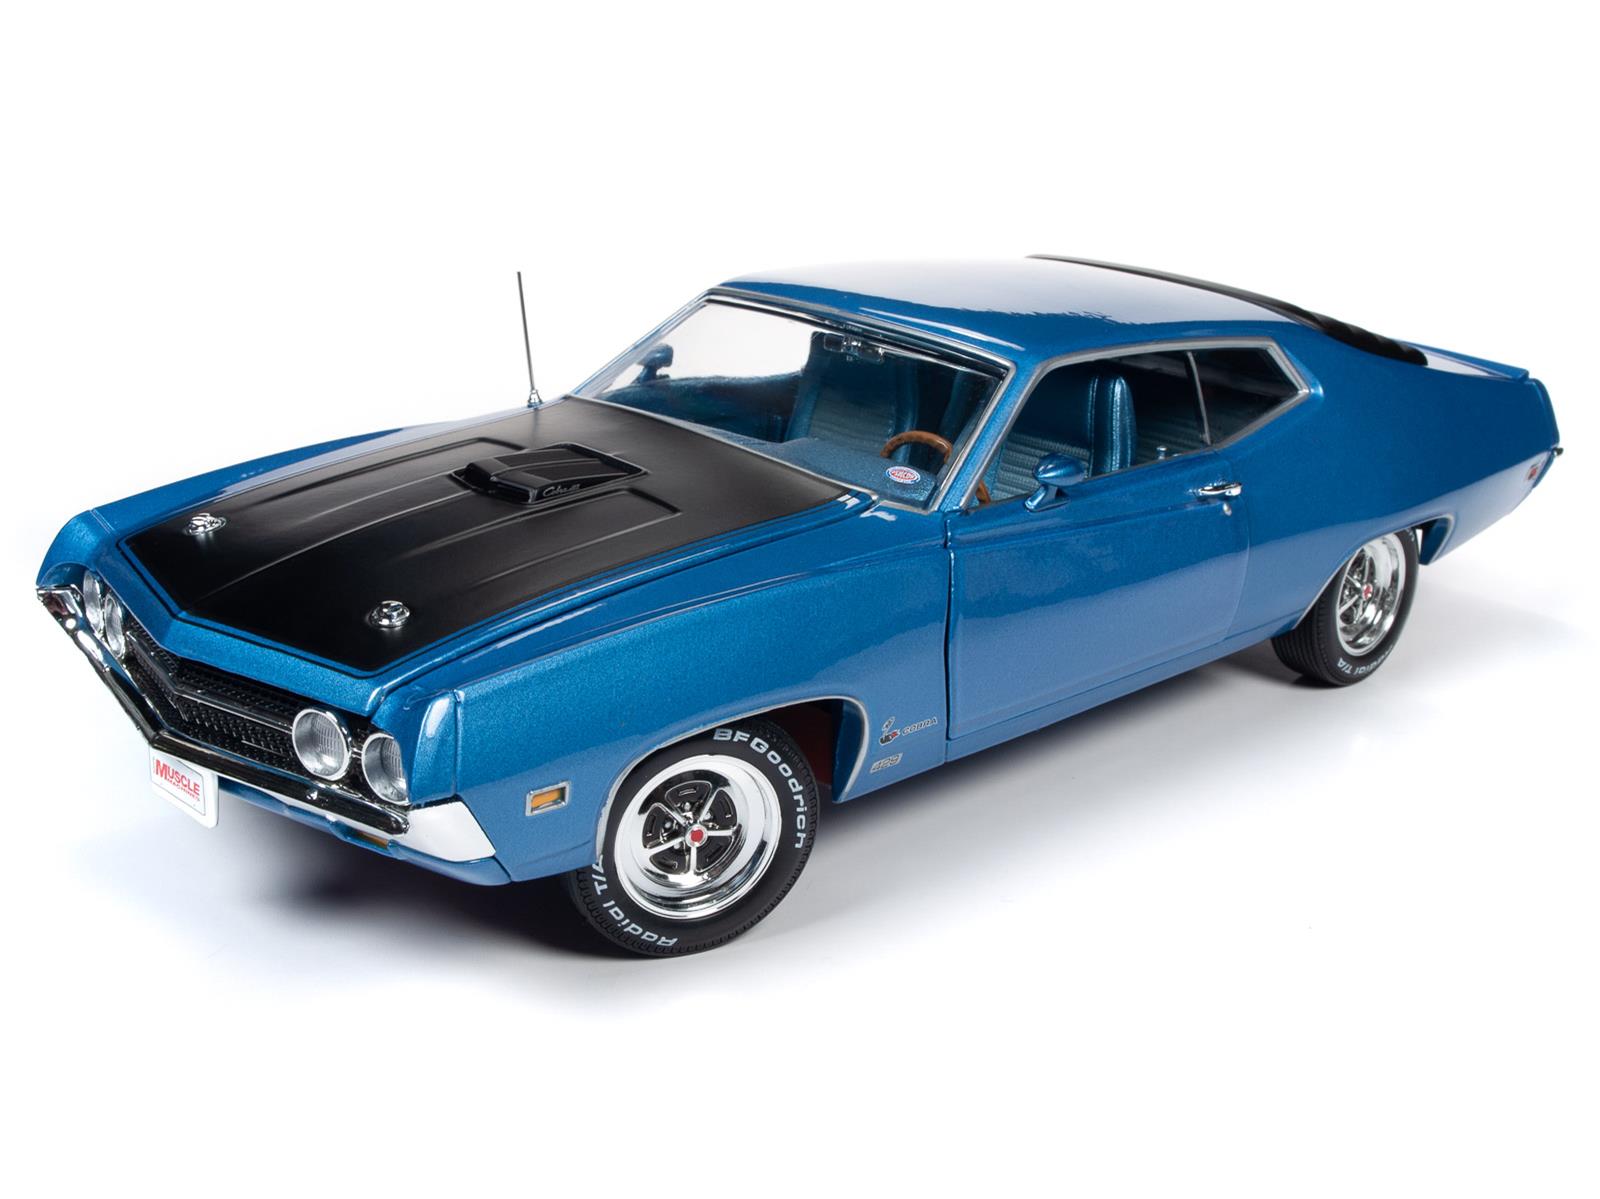 Ford Torino gt 1:18 Scale